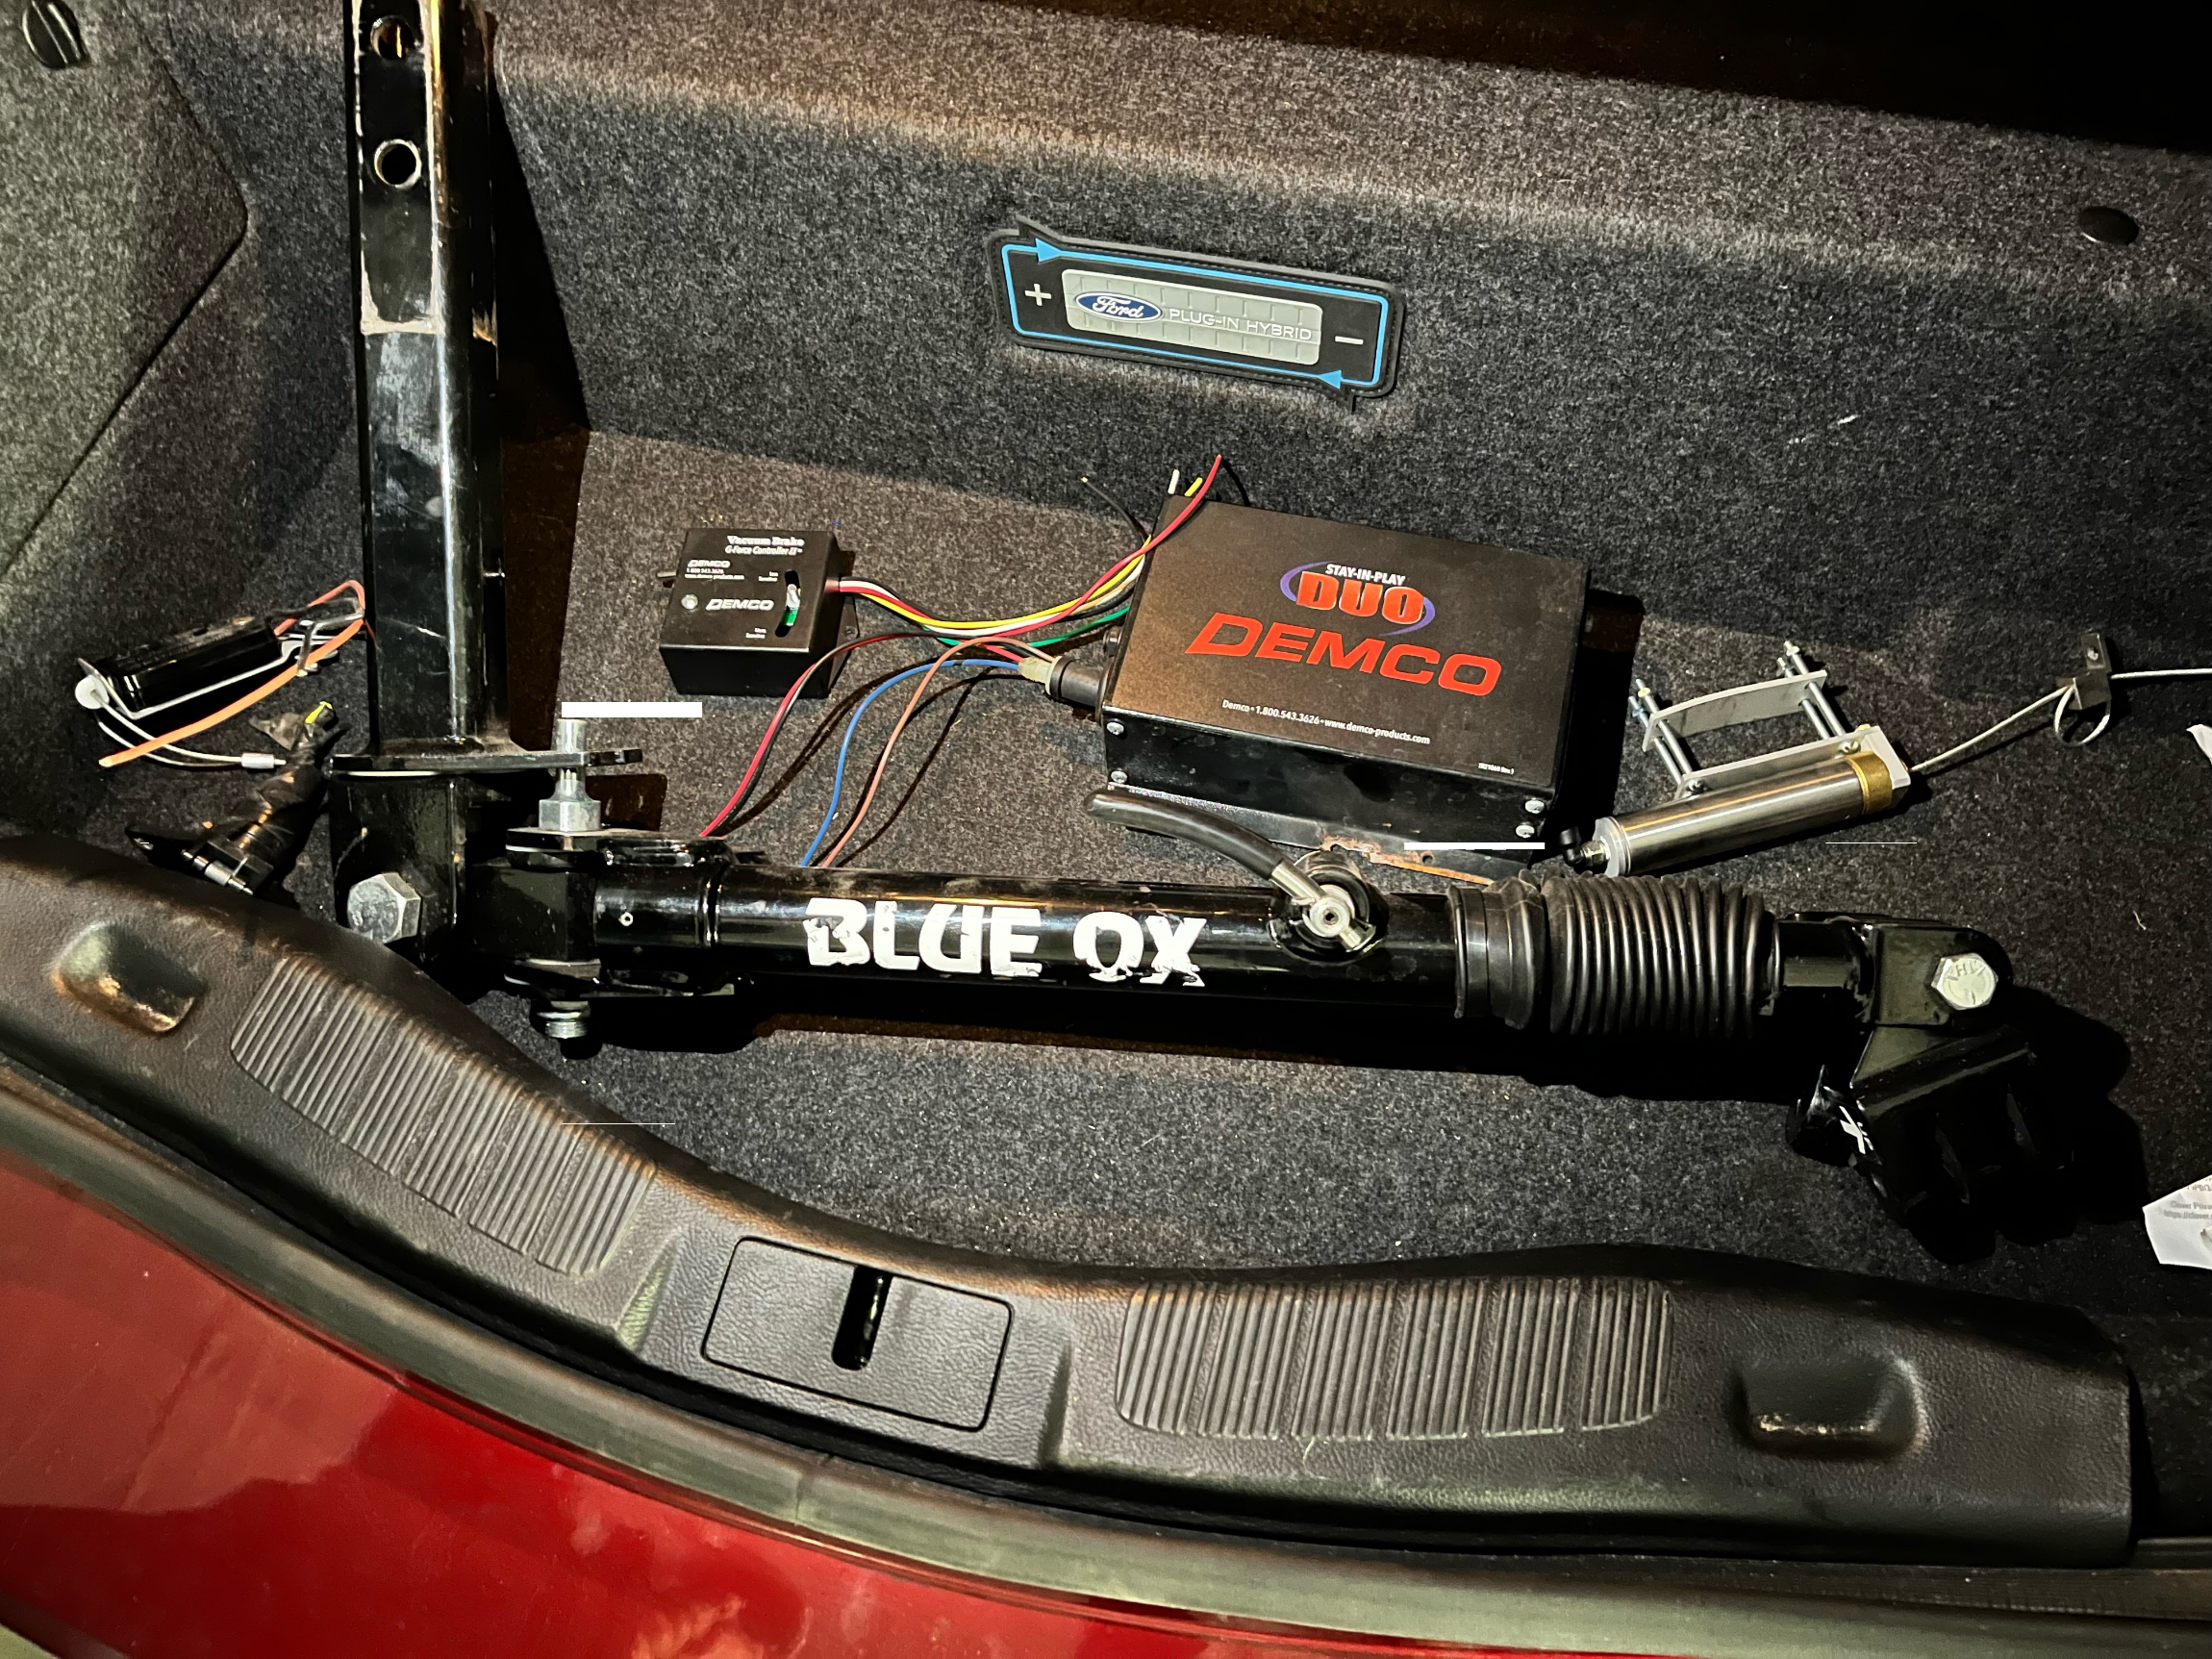 Tow bar in trunk